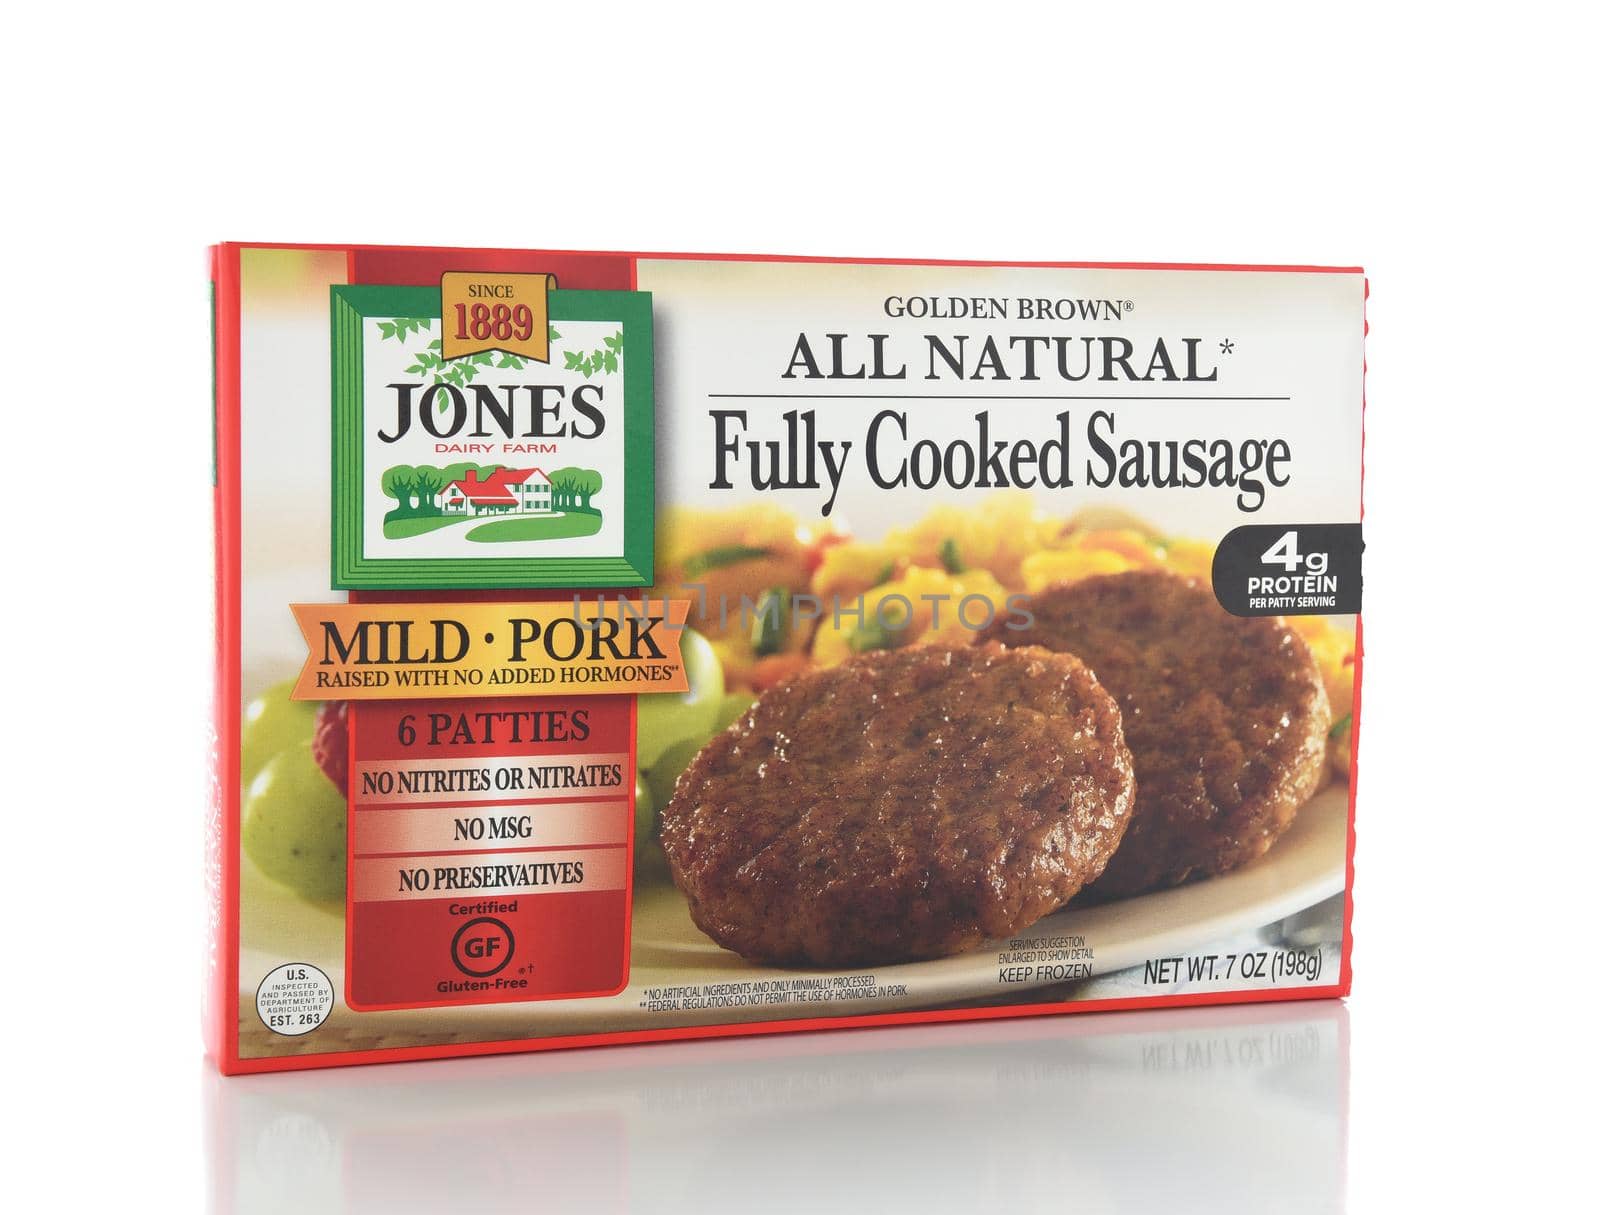 IRVINE, CALIFORNIA - NOVEMBER 16, 2016: A package of Jones Sausage. The frozen patties are fully cooked and all natural. 